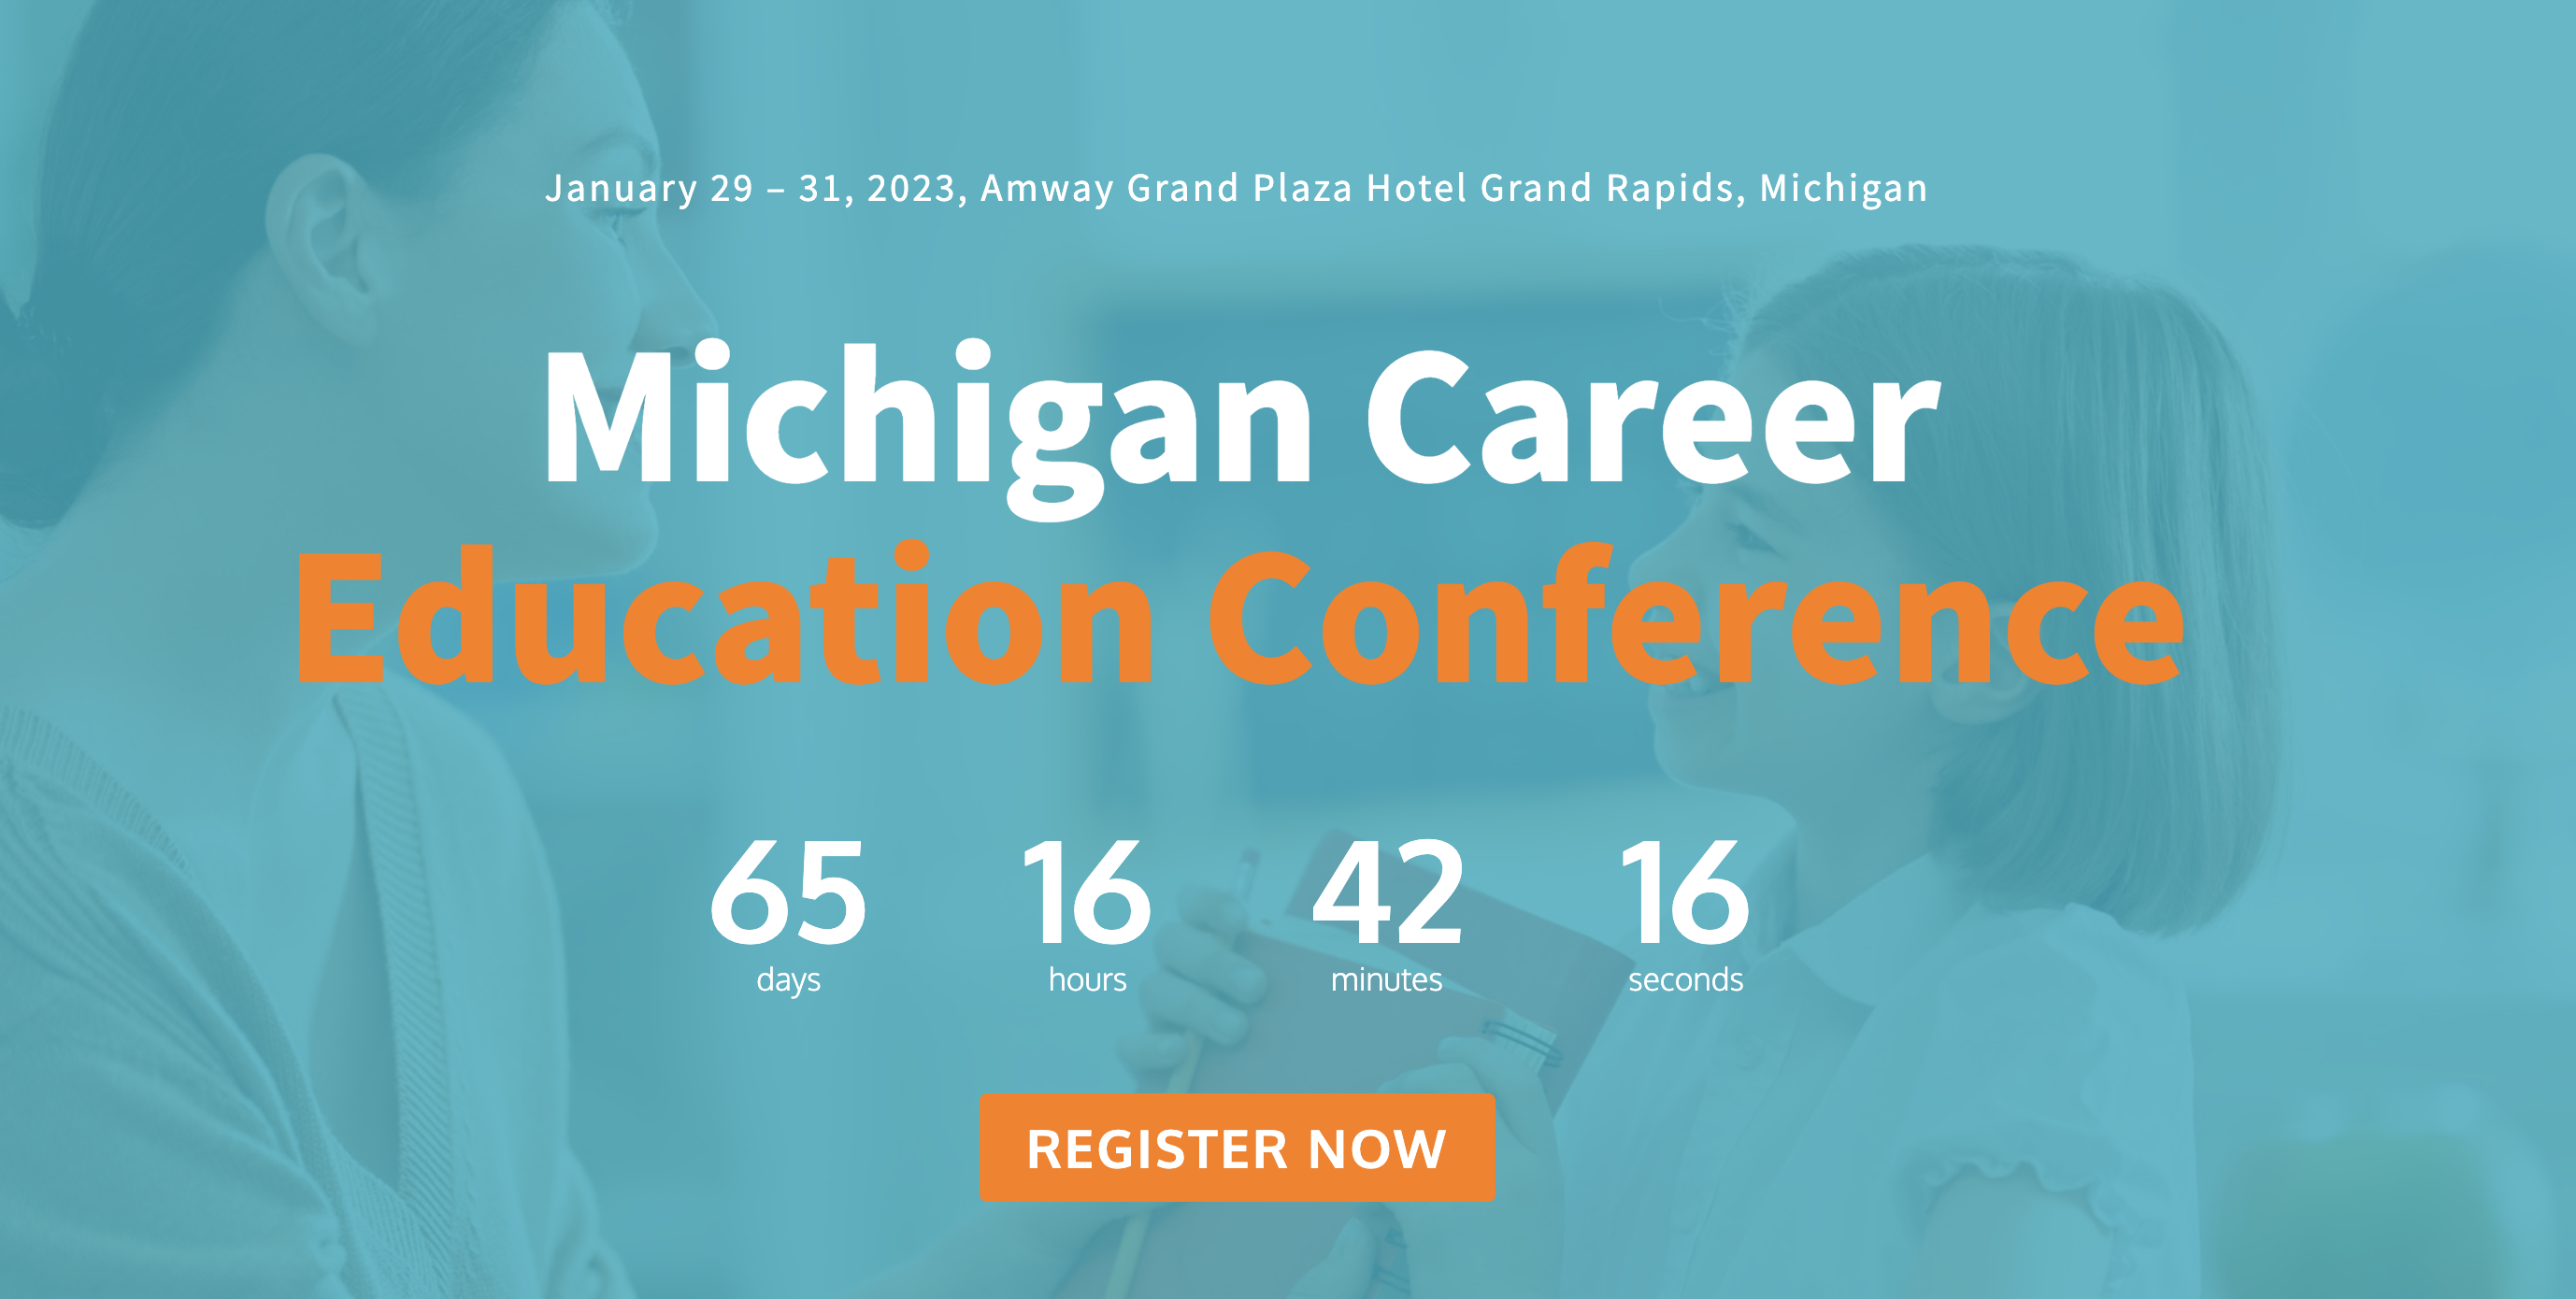 Michigan Career Education Conference